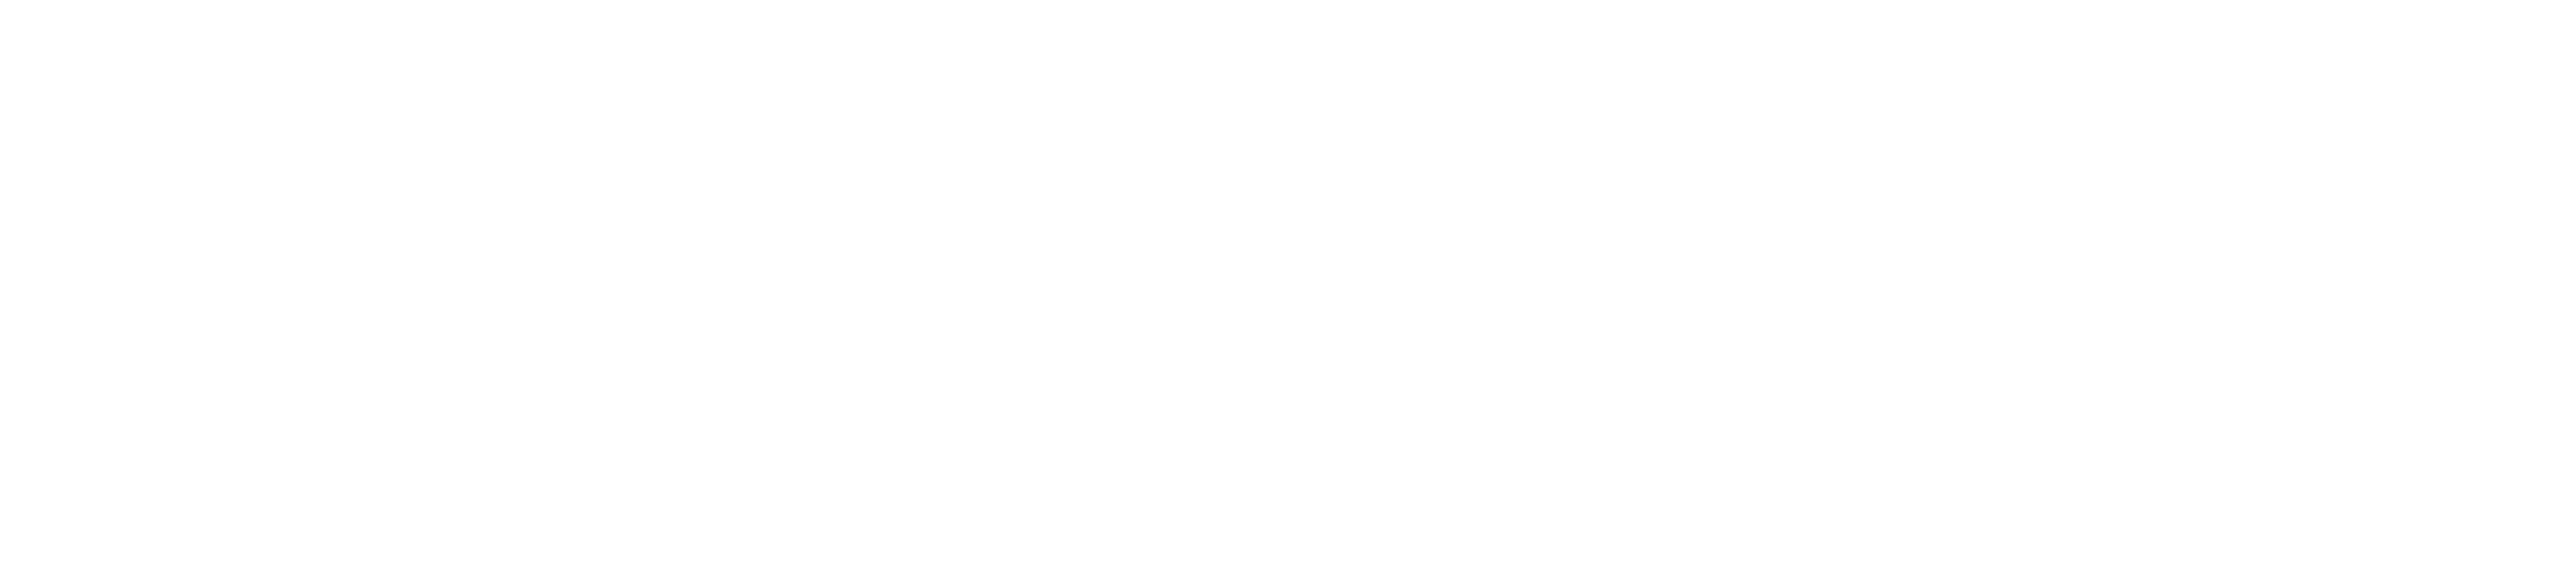 Pluto logo with the text Better classes for all, made easy